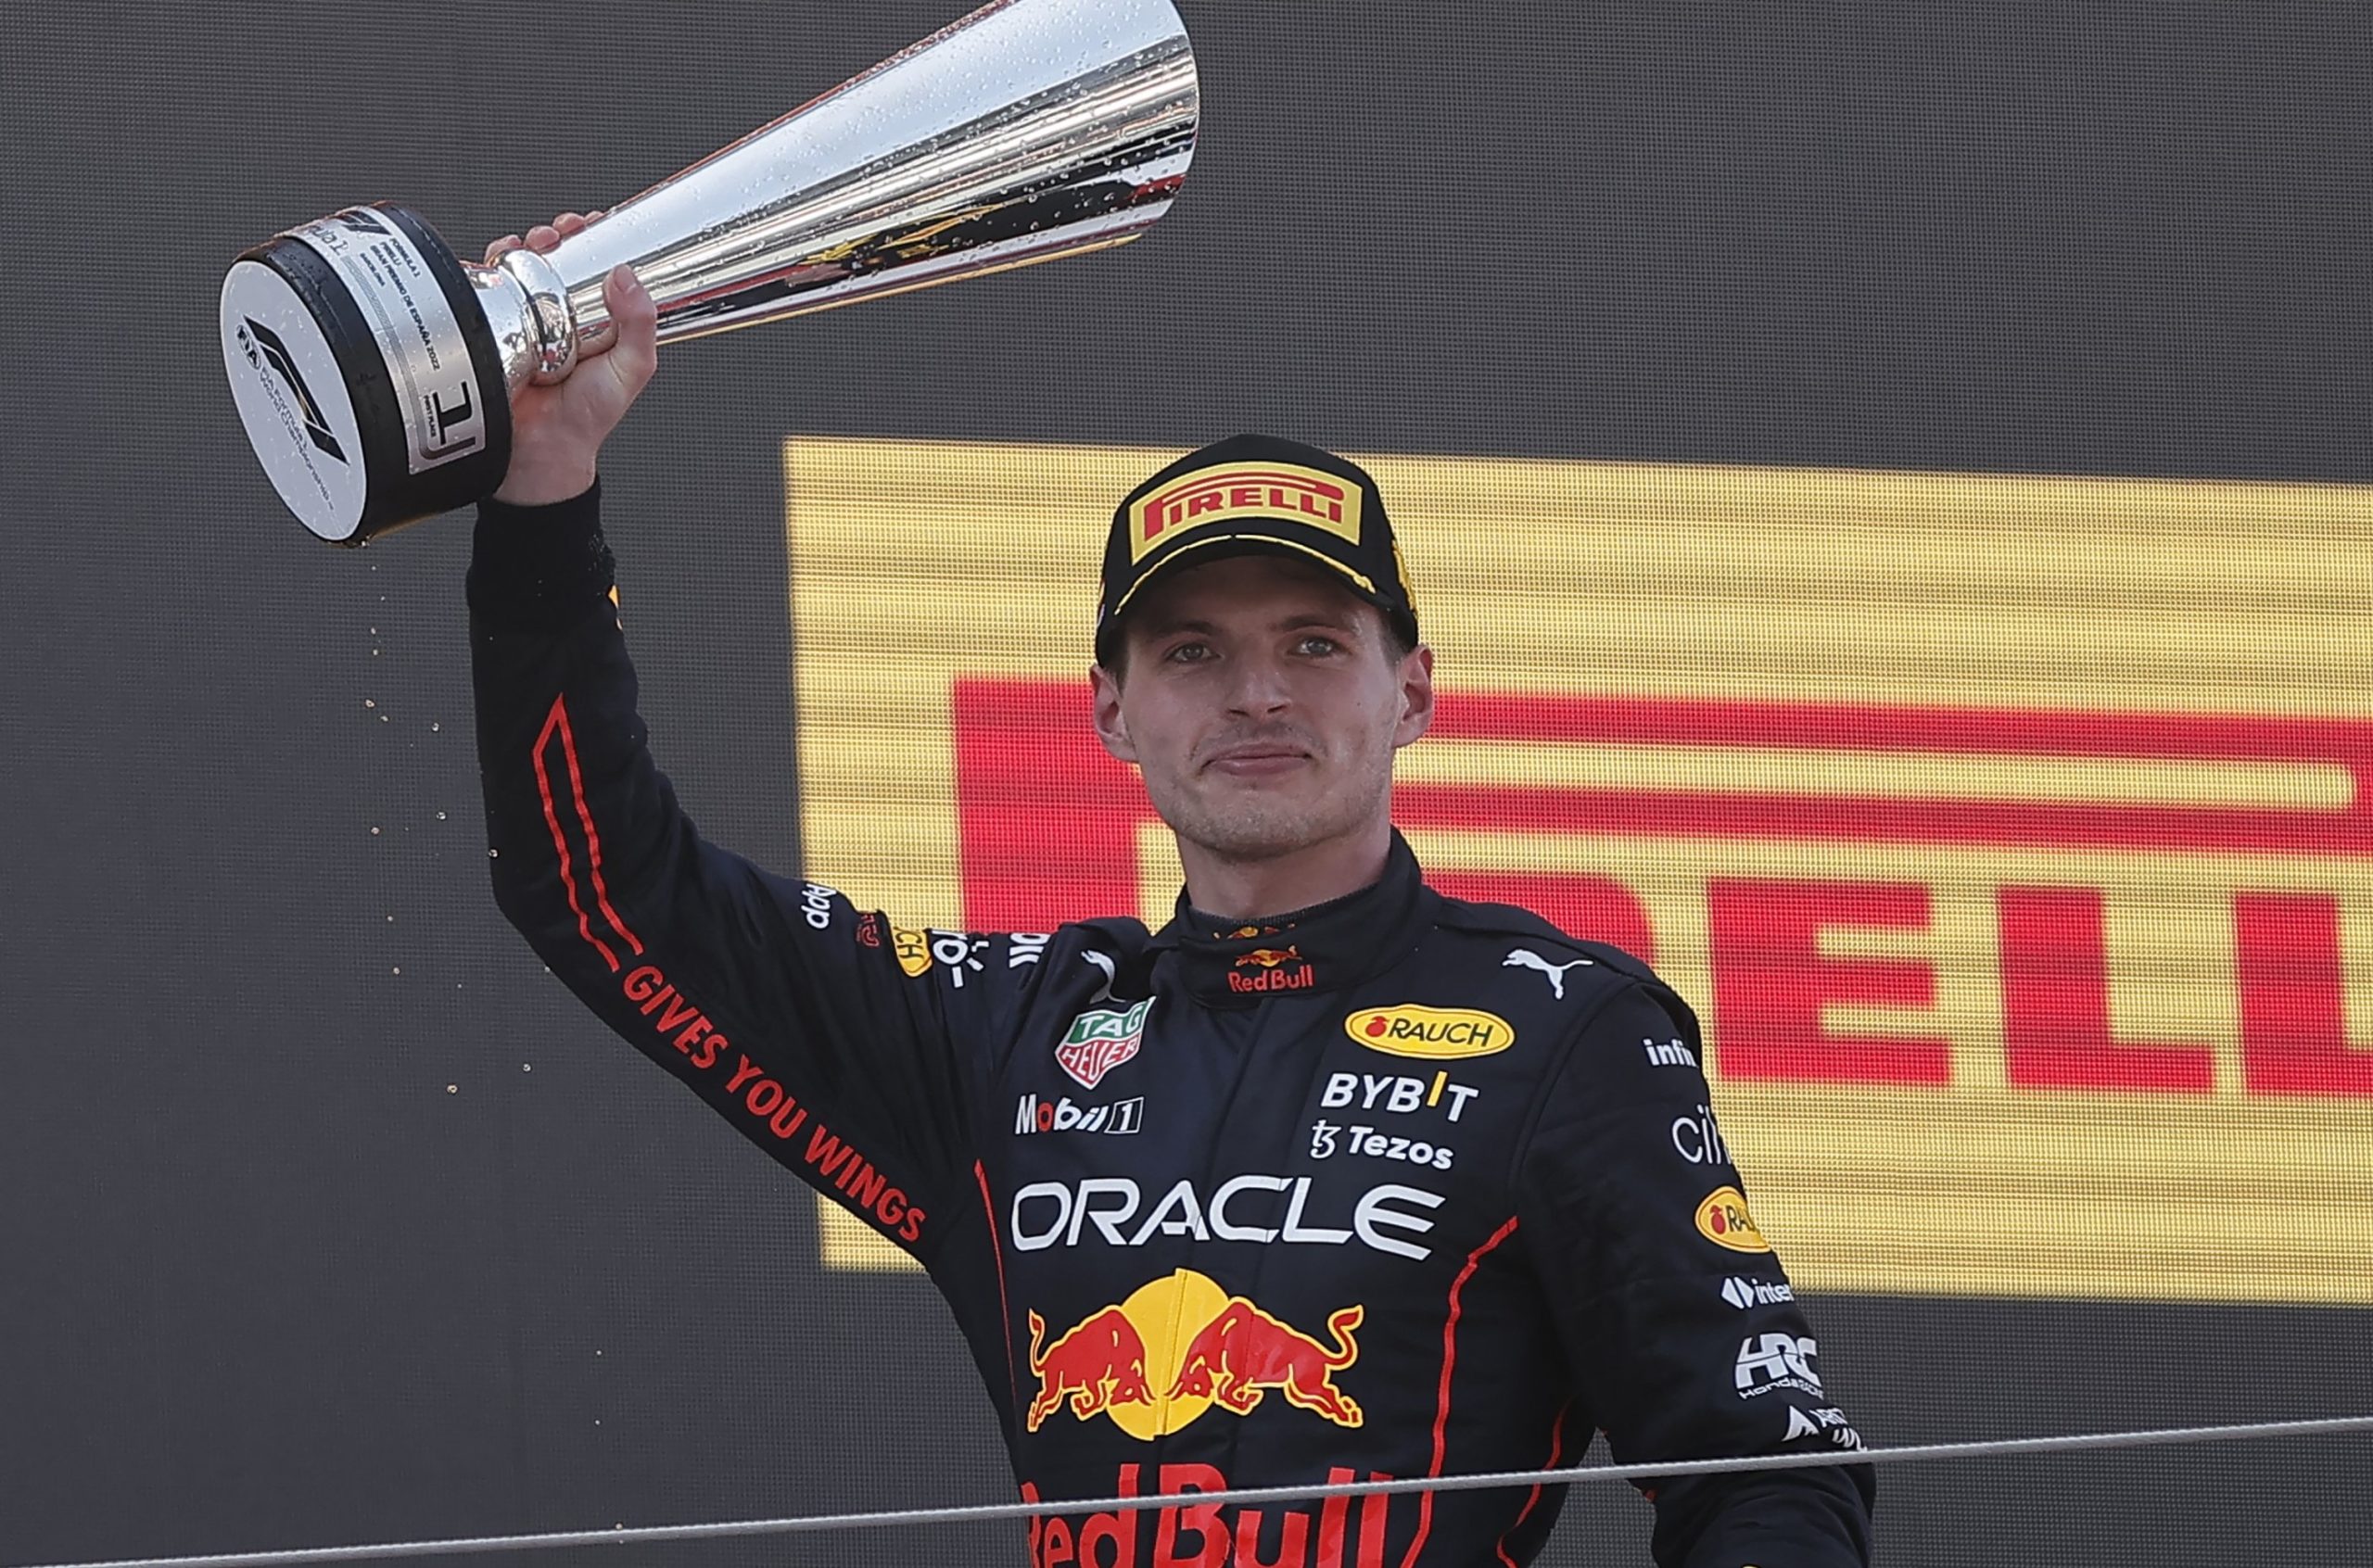 Verstappen takes championship lead after winning the Spanish Grand Prix